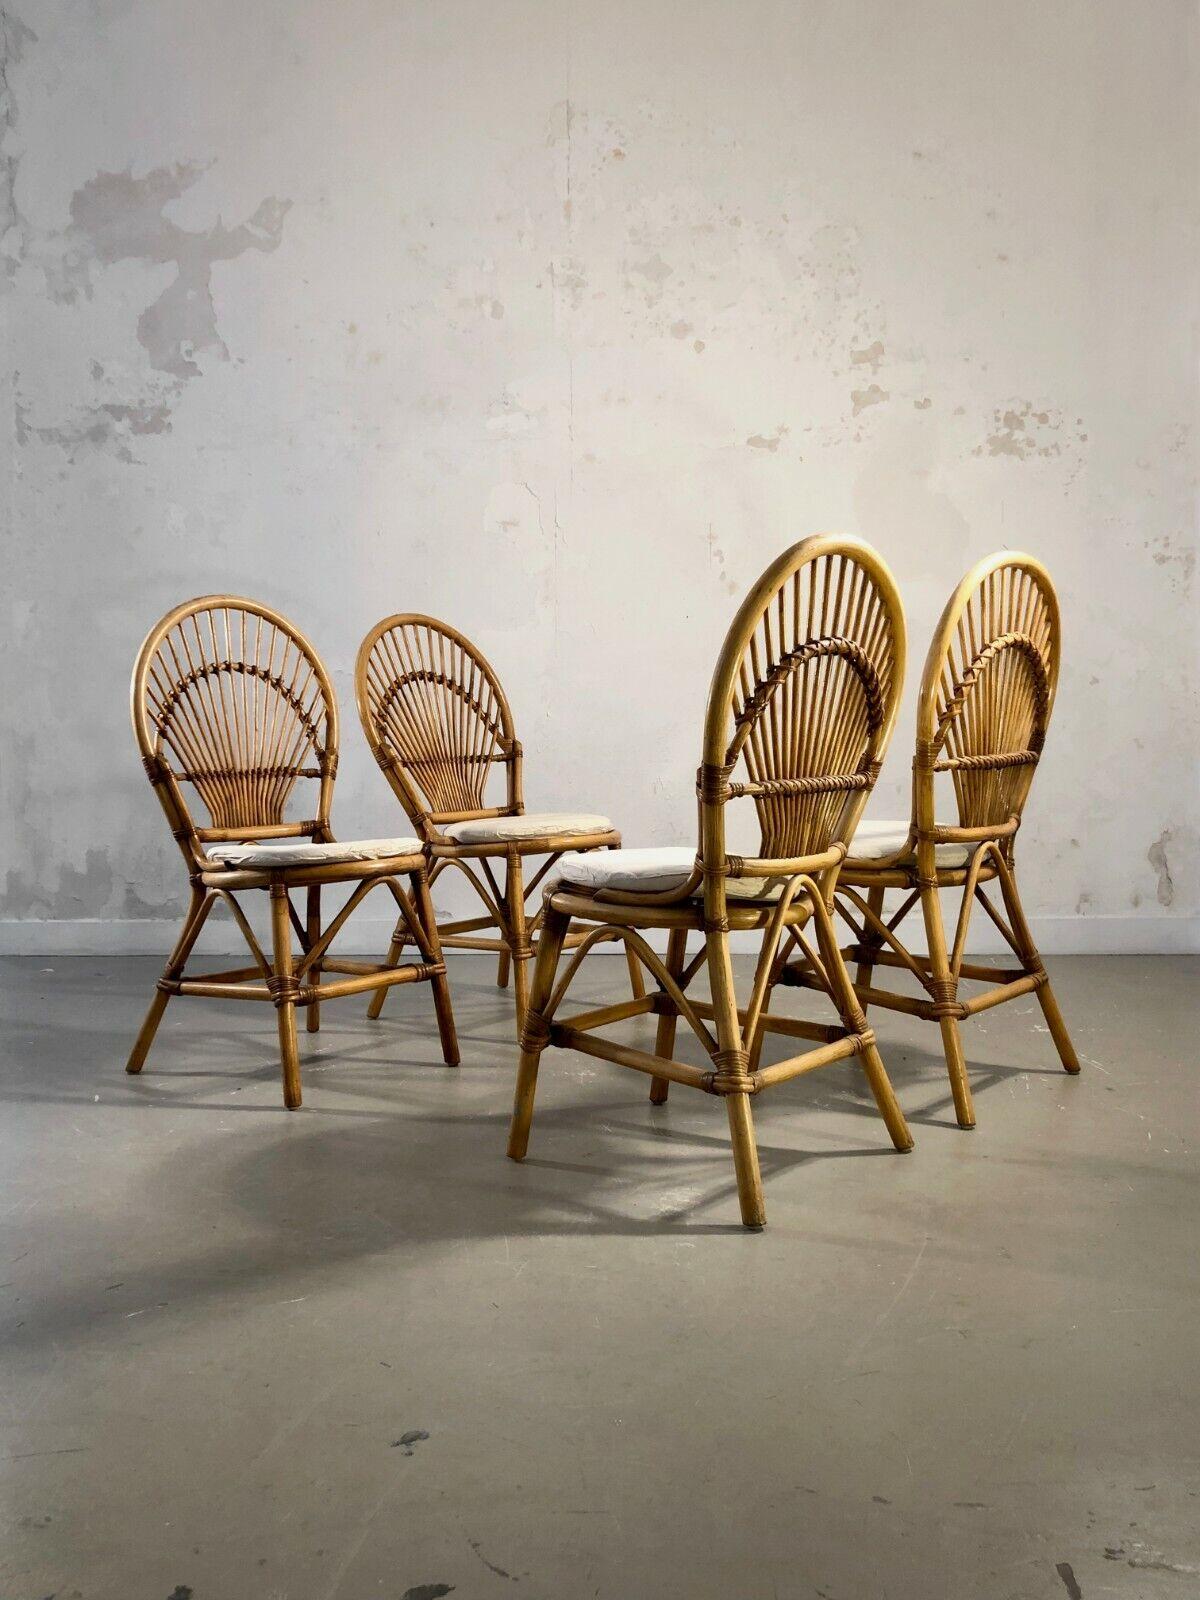 A charming set of 4 table or terrace chairs, or even a complete living room (with table and armchair extra, see below) indoor or outdoor, Art-Popular, Modernist, Shabby-Chic, all curved structures in bamboo and woven wicker, small white circular